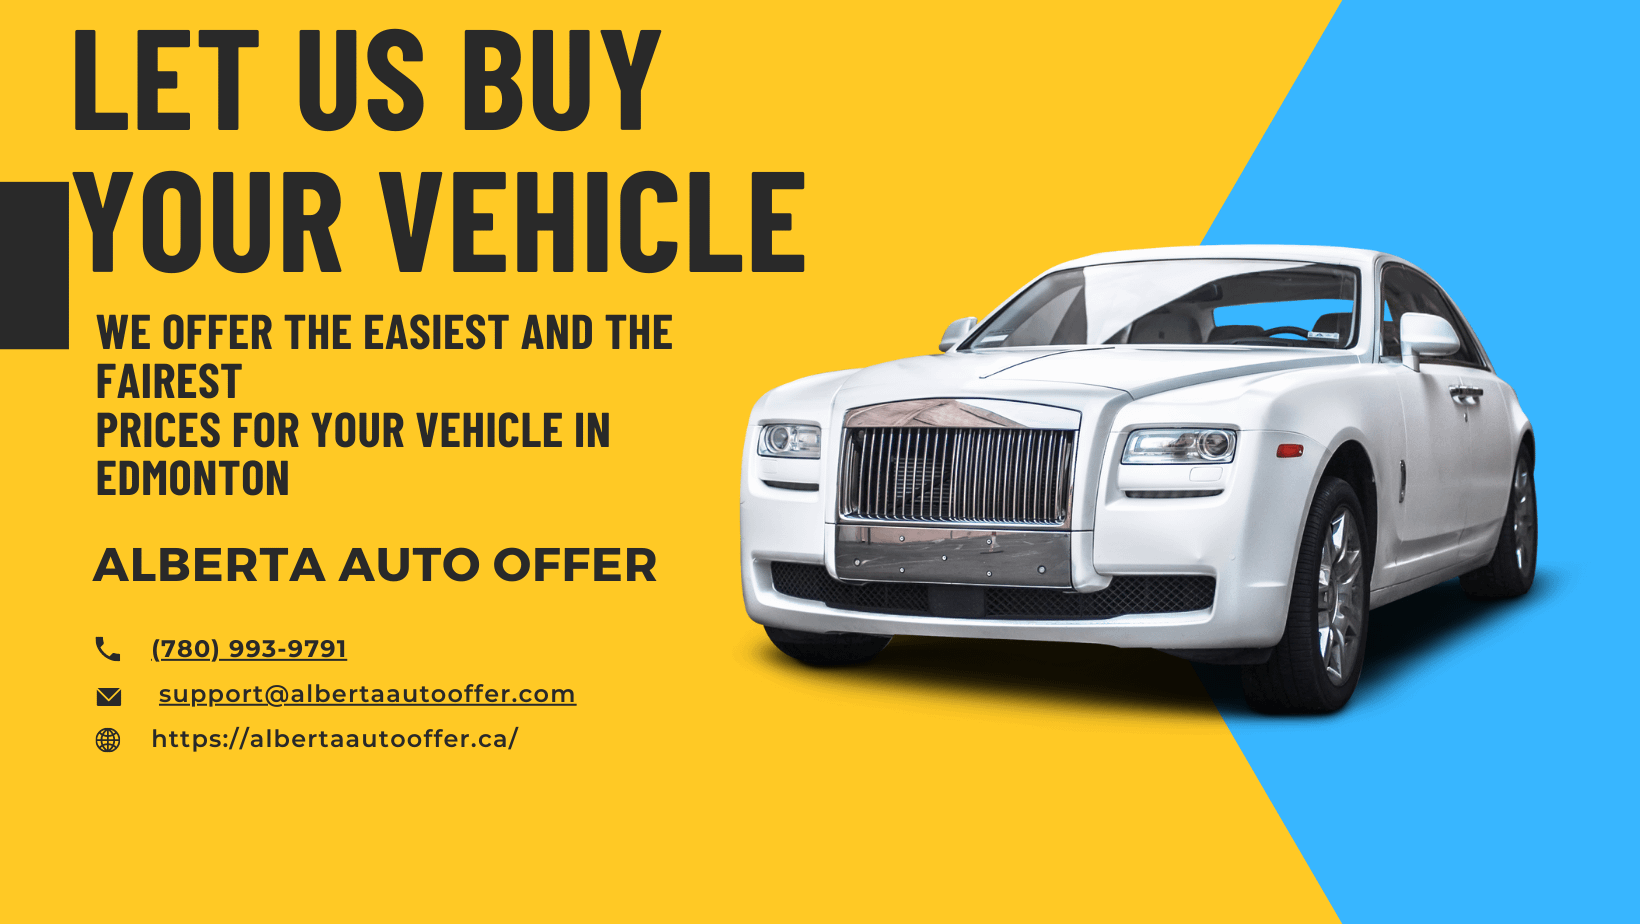 Let us buy your vehicle